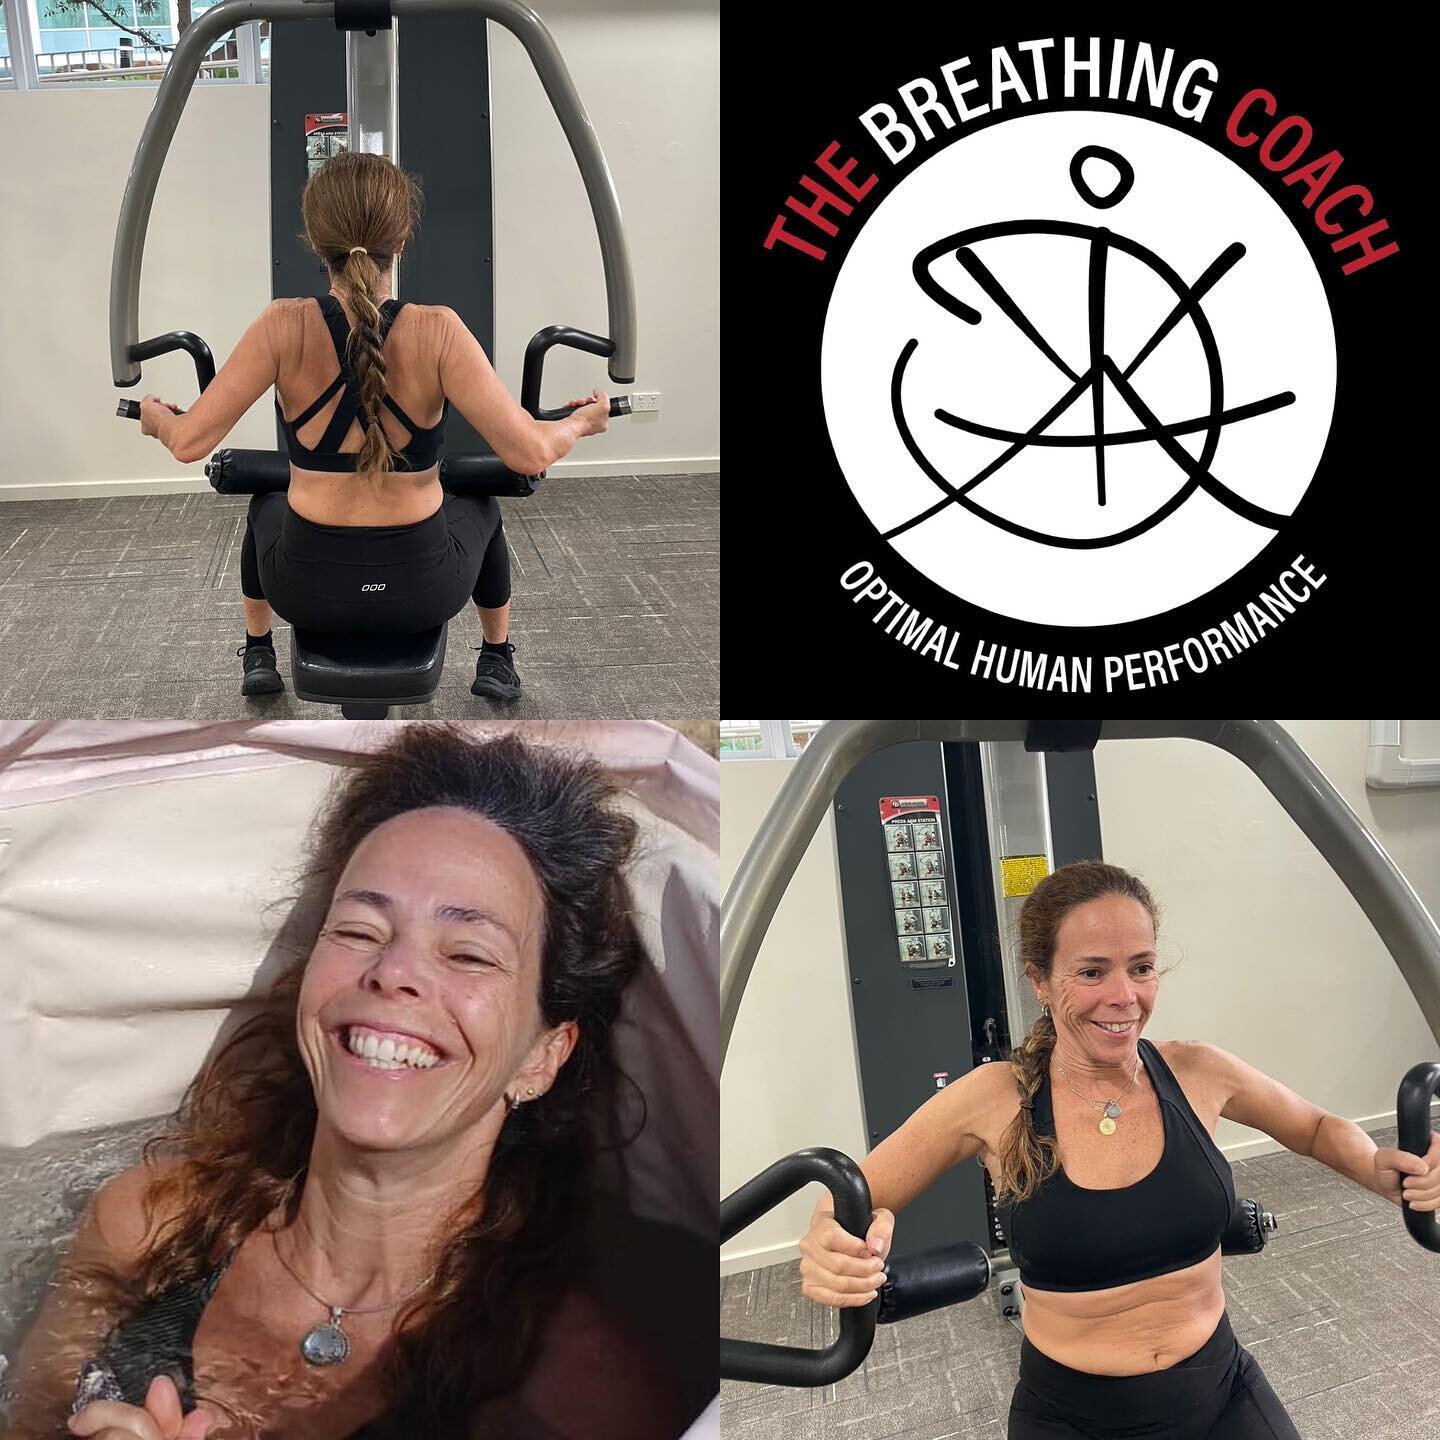 Enjoy the benefits of a Personal Training session with a focus on using your breath to optimise your performance, followed by an ice bath. Who is keen? 

#breathwork #fitness #icebaths #feelinggood